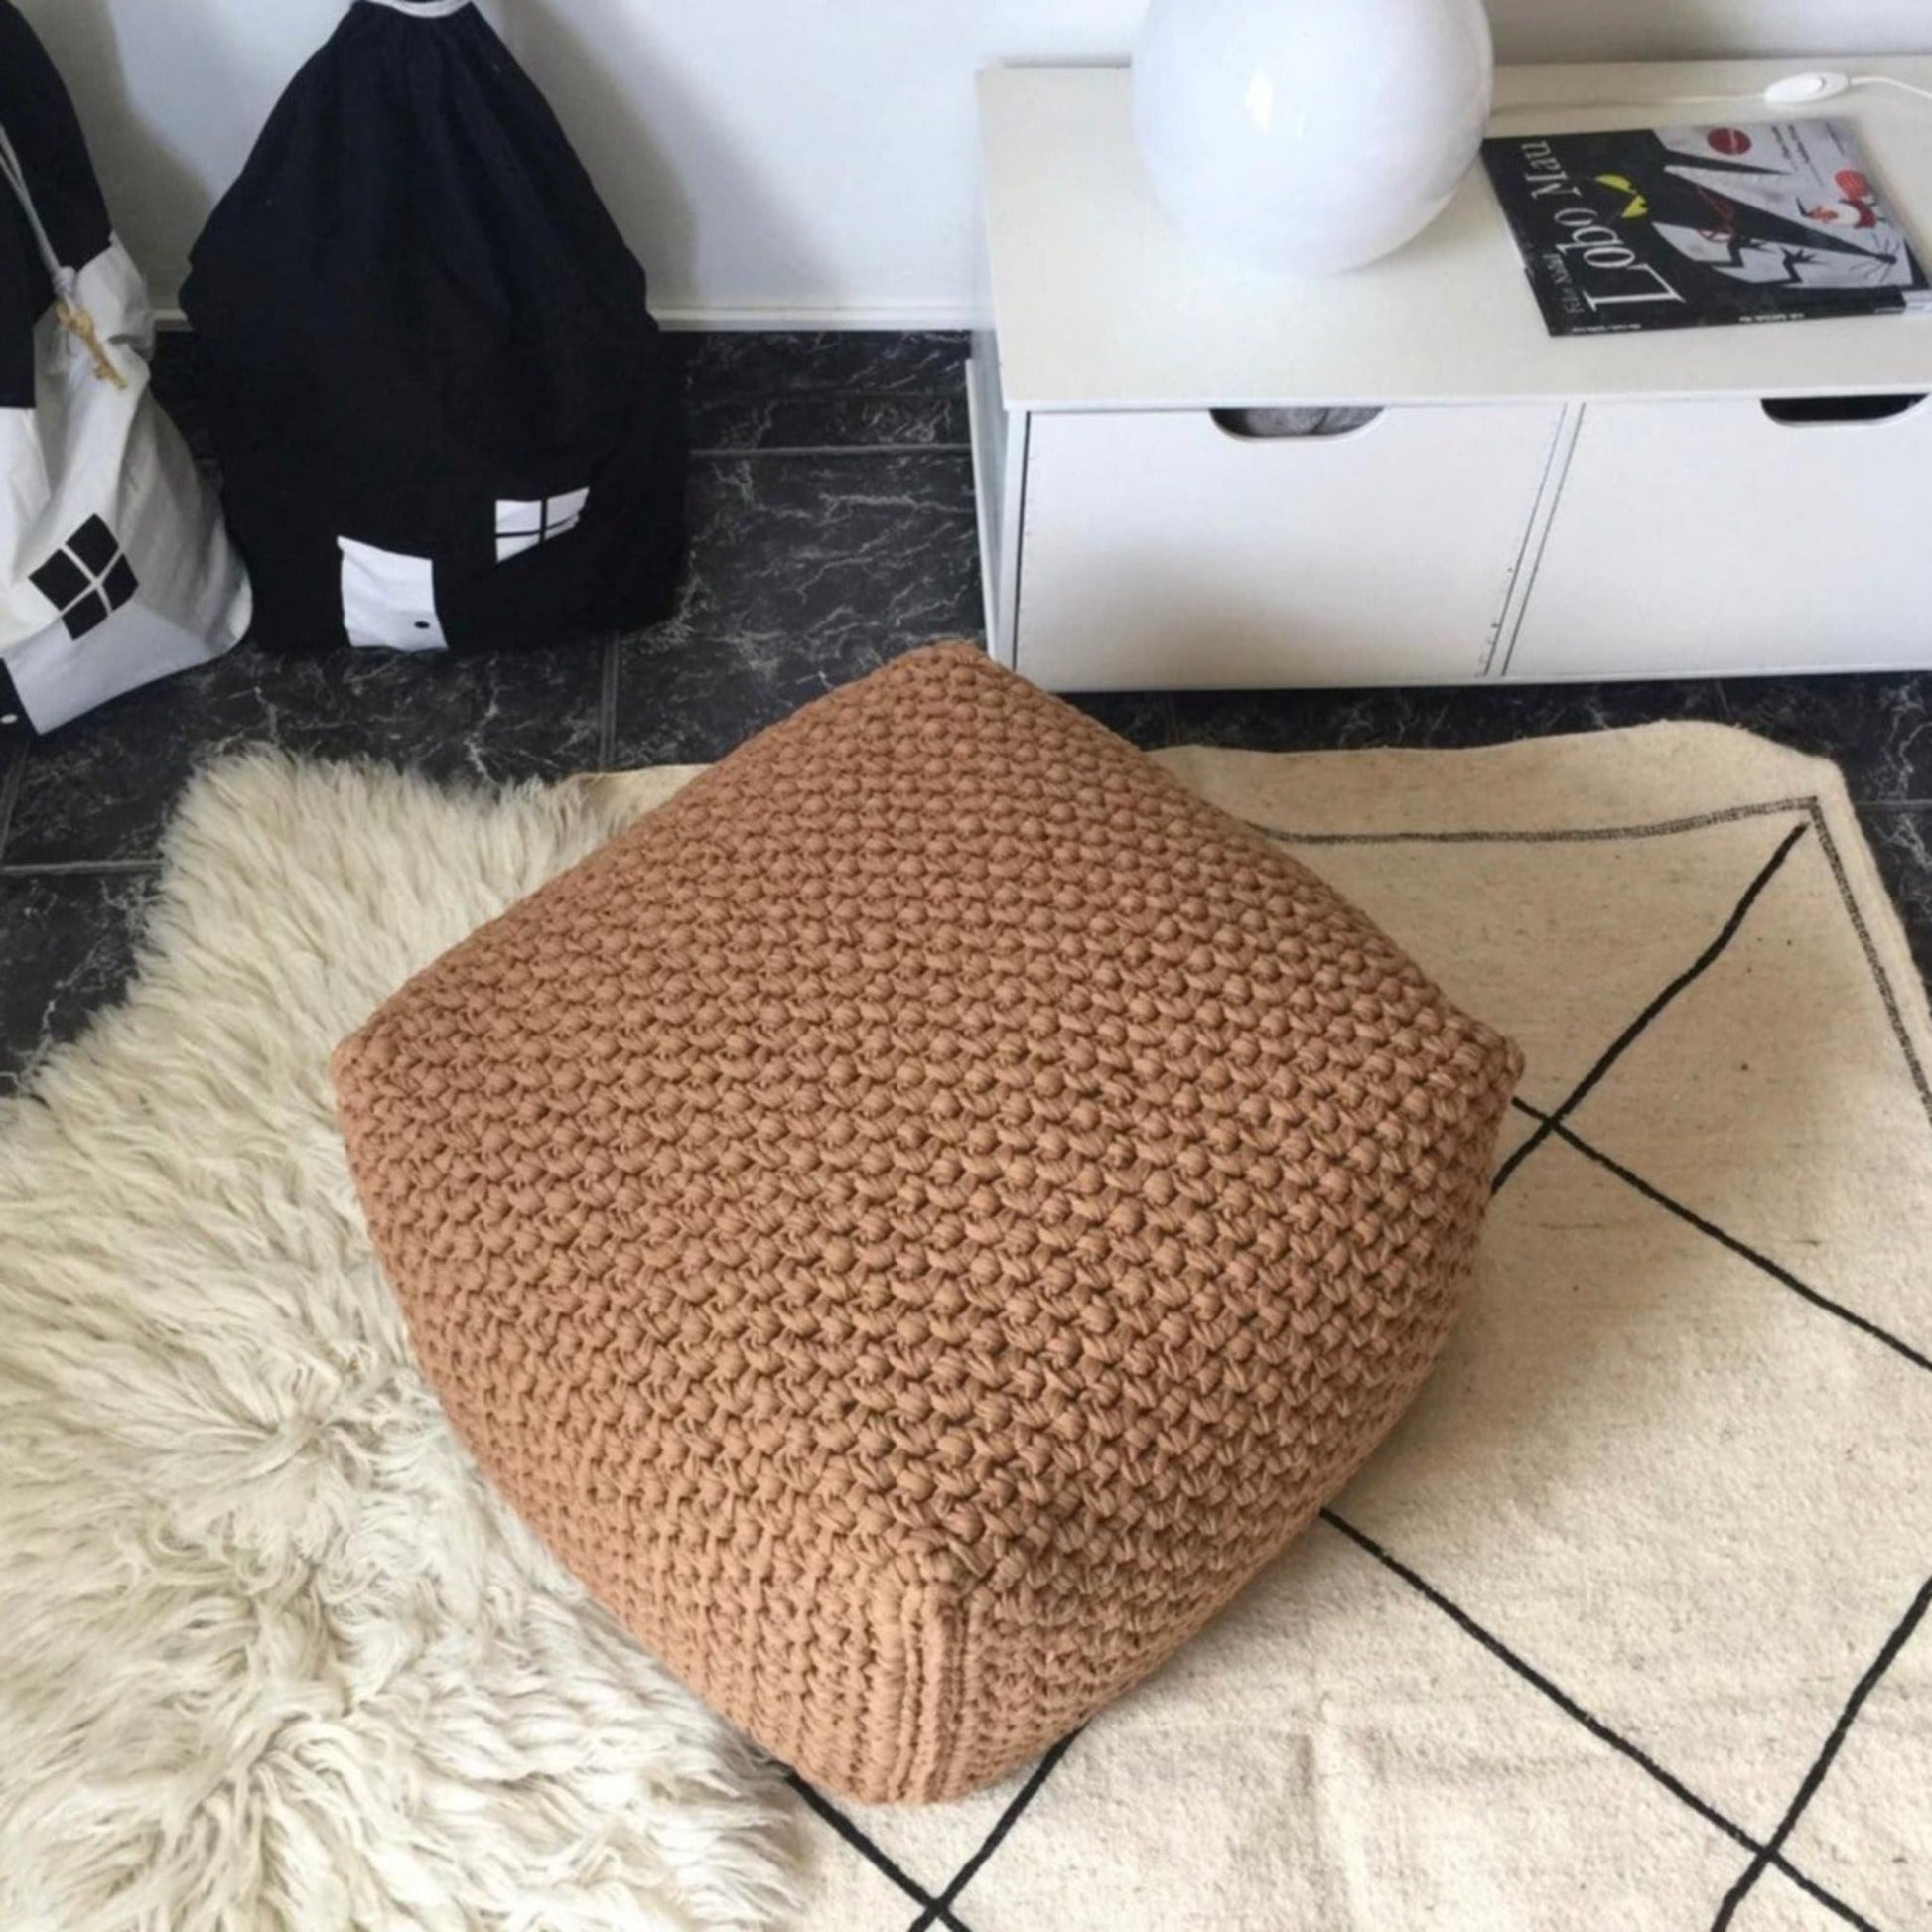 Square ottoman cover in camel shade placed on a textured rug